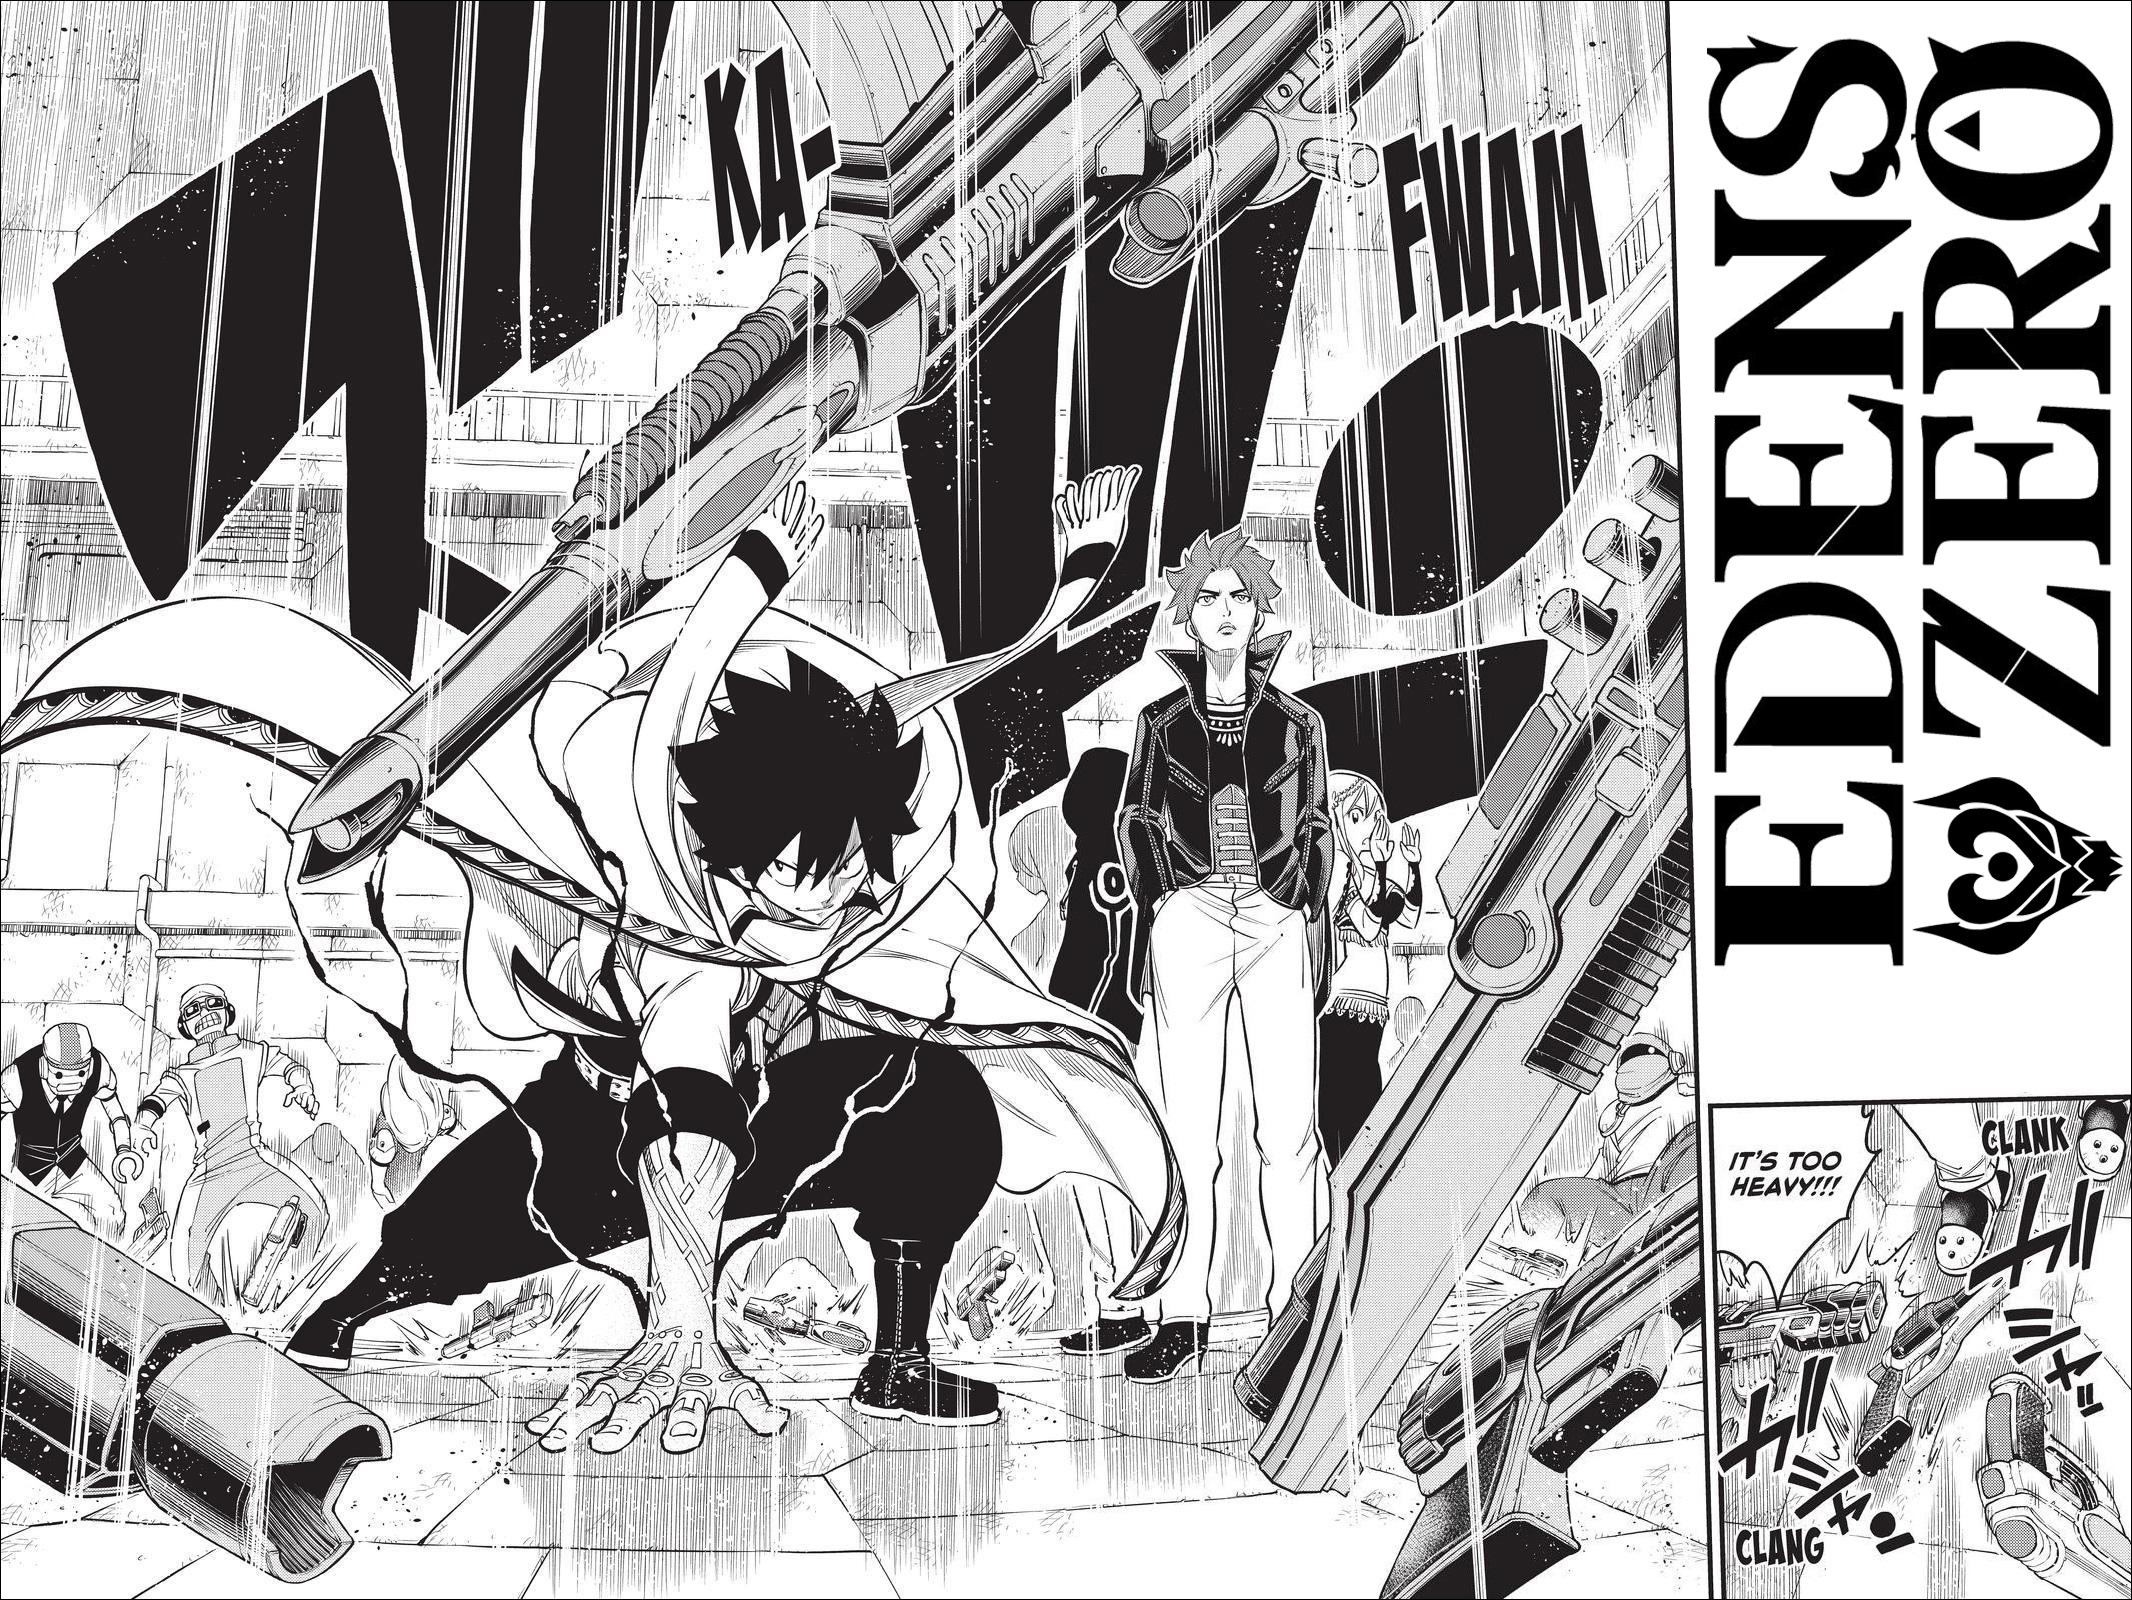 Edens Zero chapter 135 - Shiki uses his Gravity Gear to disarm all the rebels